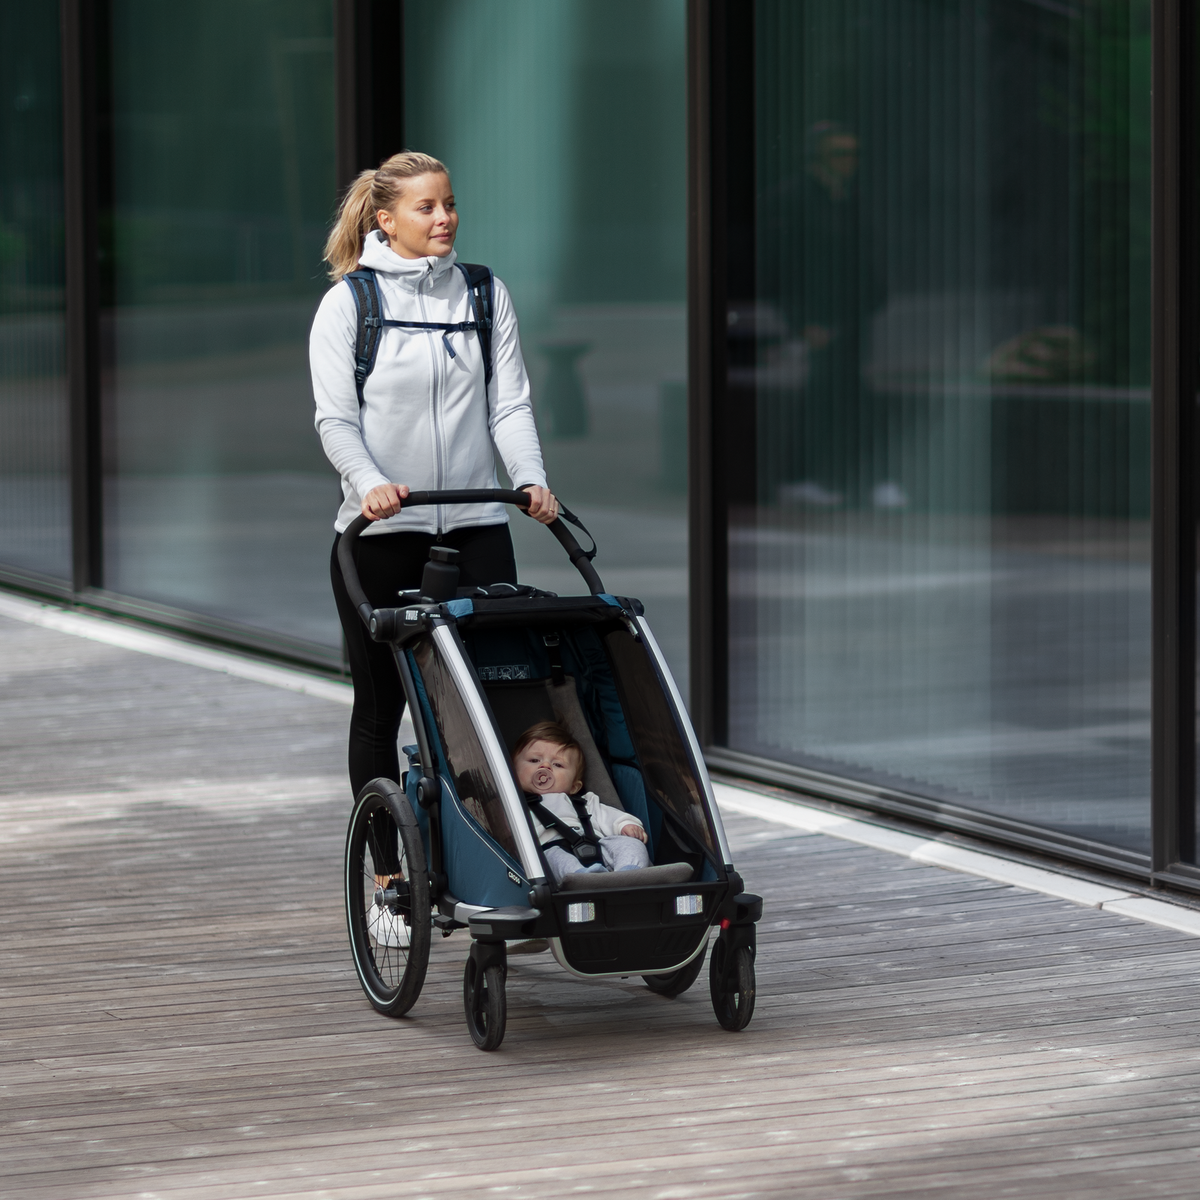 A woman strolls down the street with a baby in her child bike trailer using a Thule Chariot Infant Sling.